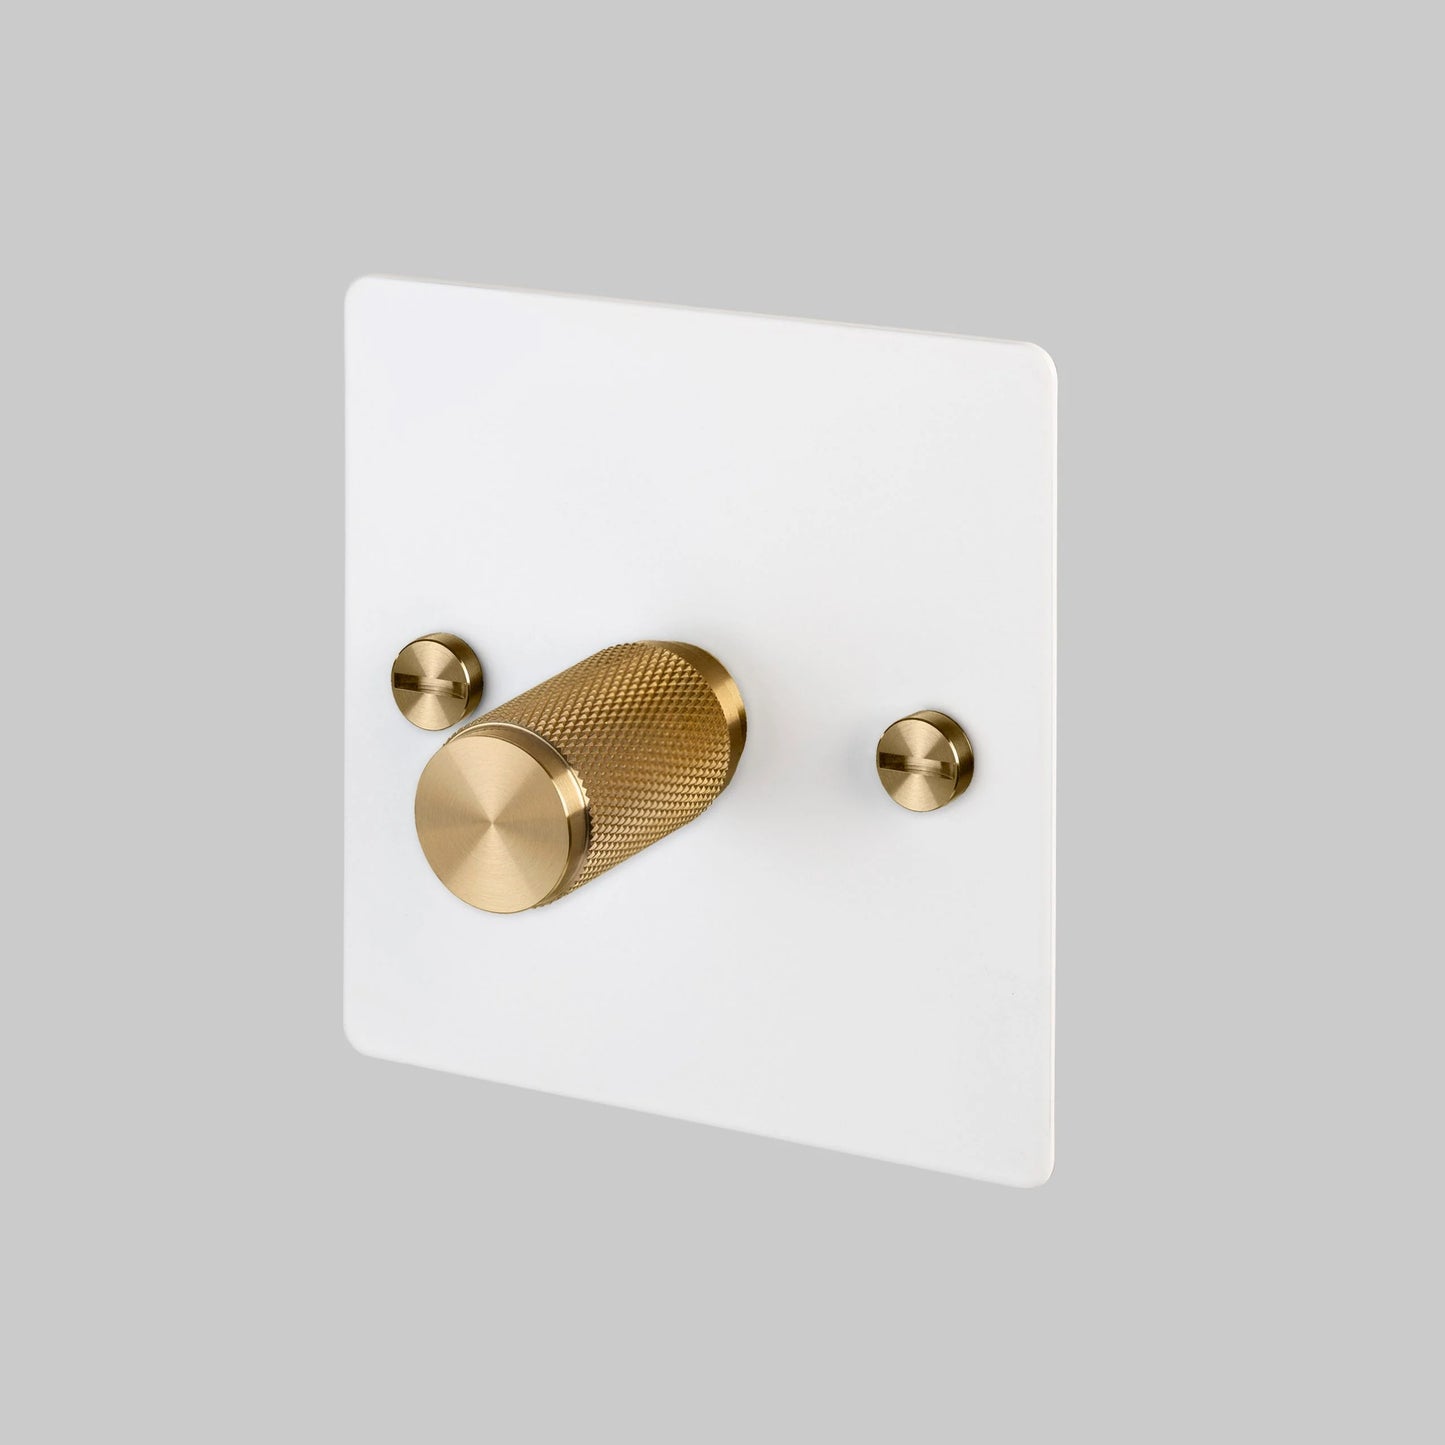 1G Dimmer/ 120W/ White with Brass details, angled view.